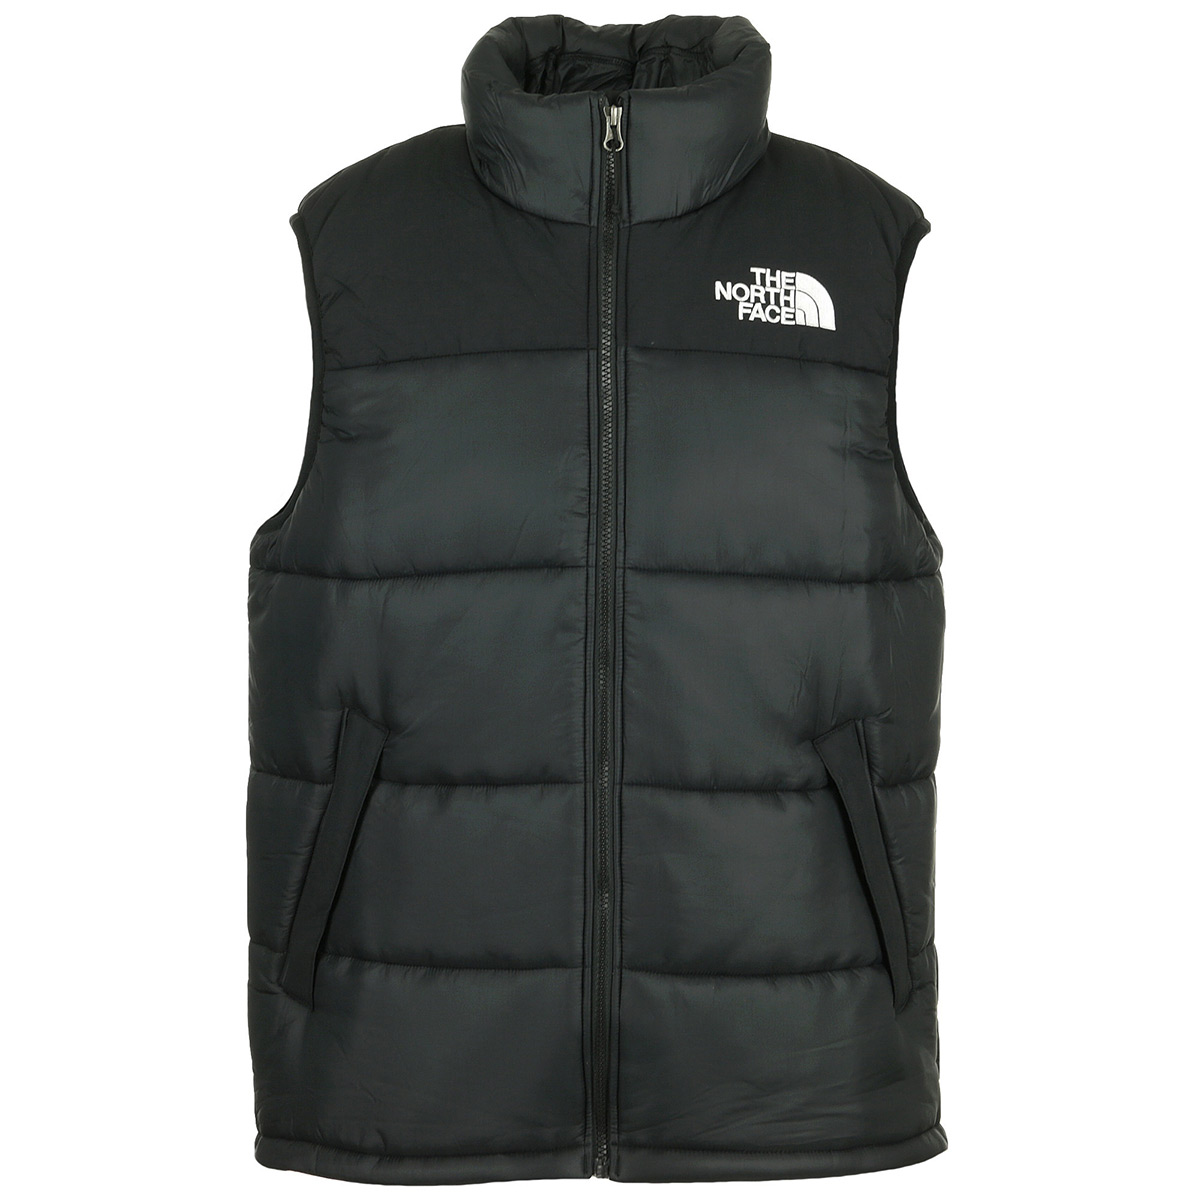 The North Face "Himalayan Insulated Vest"